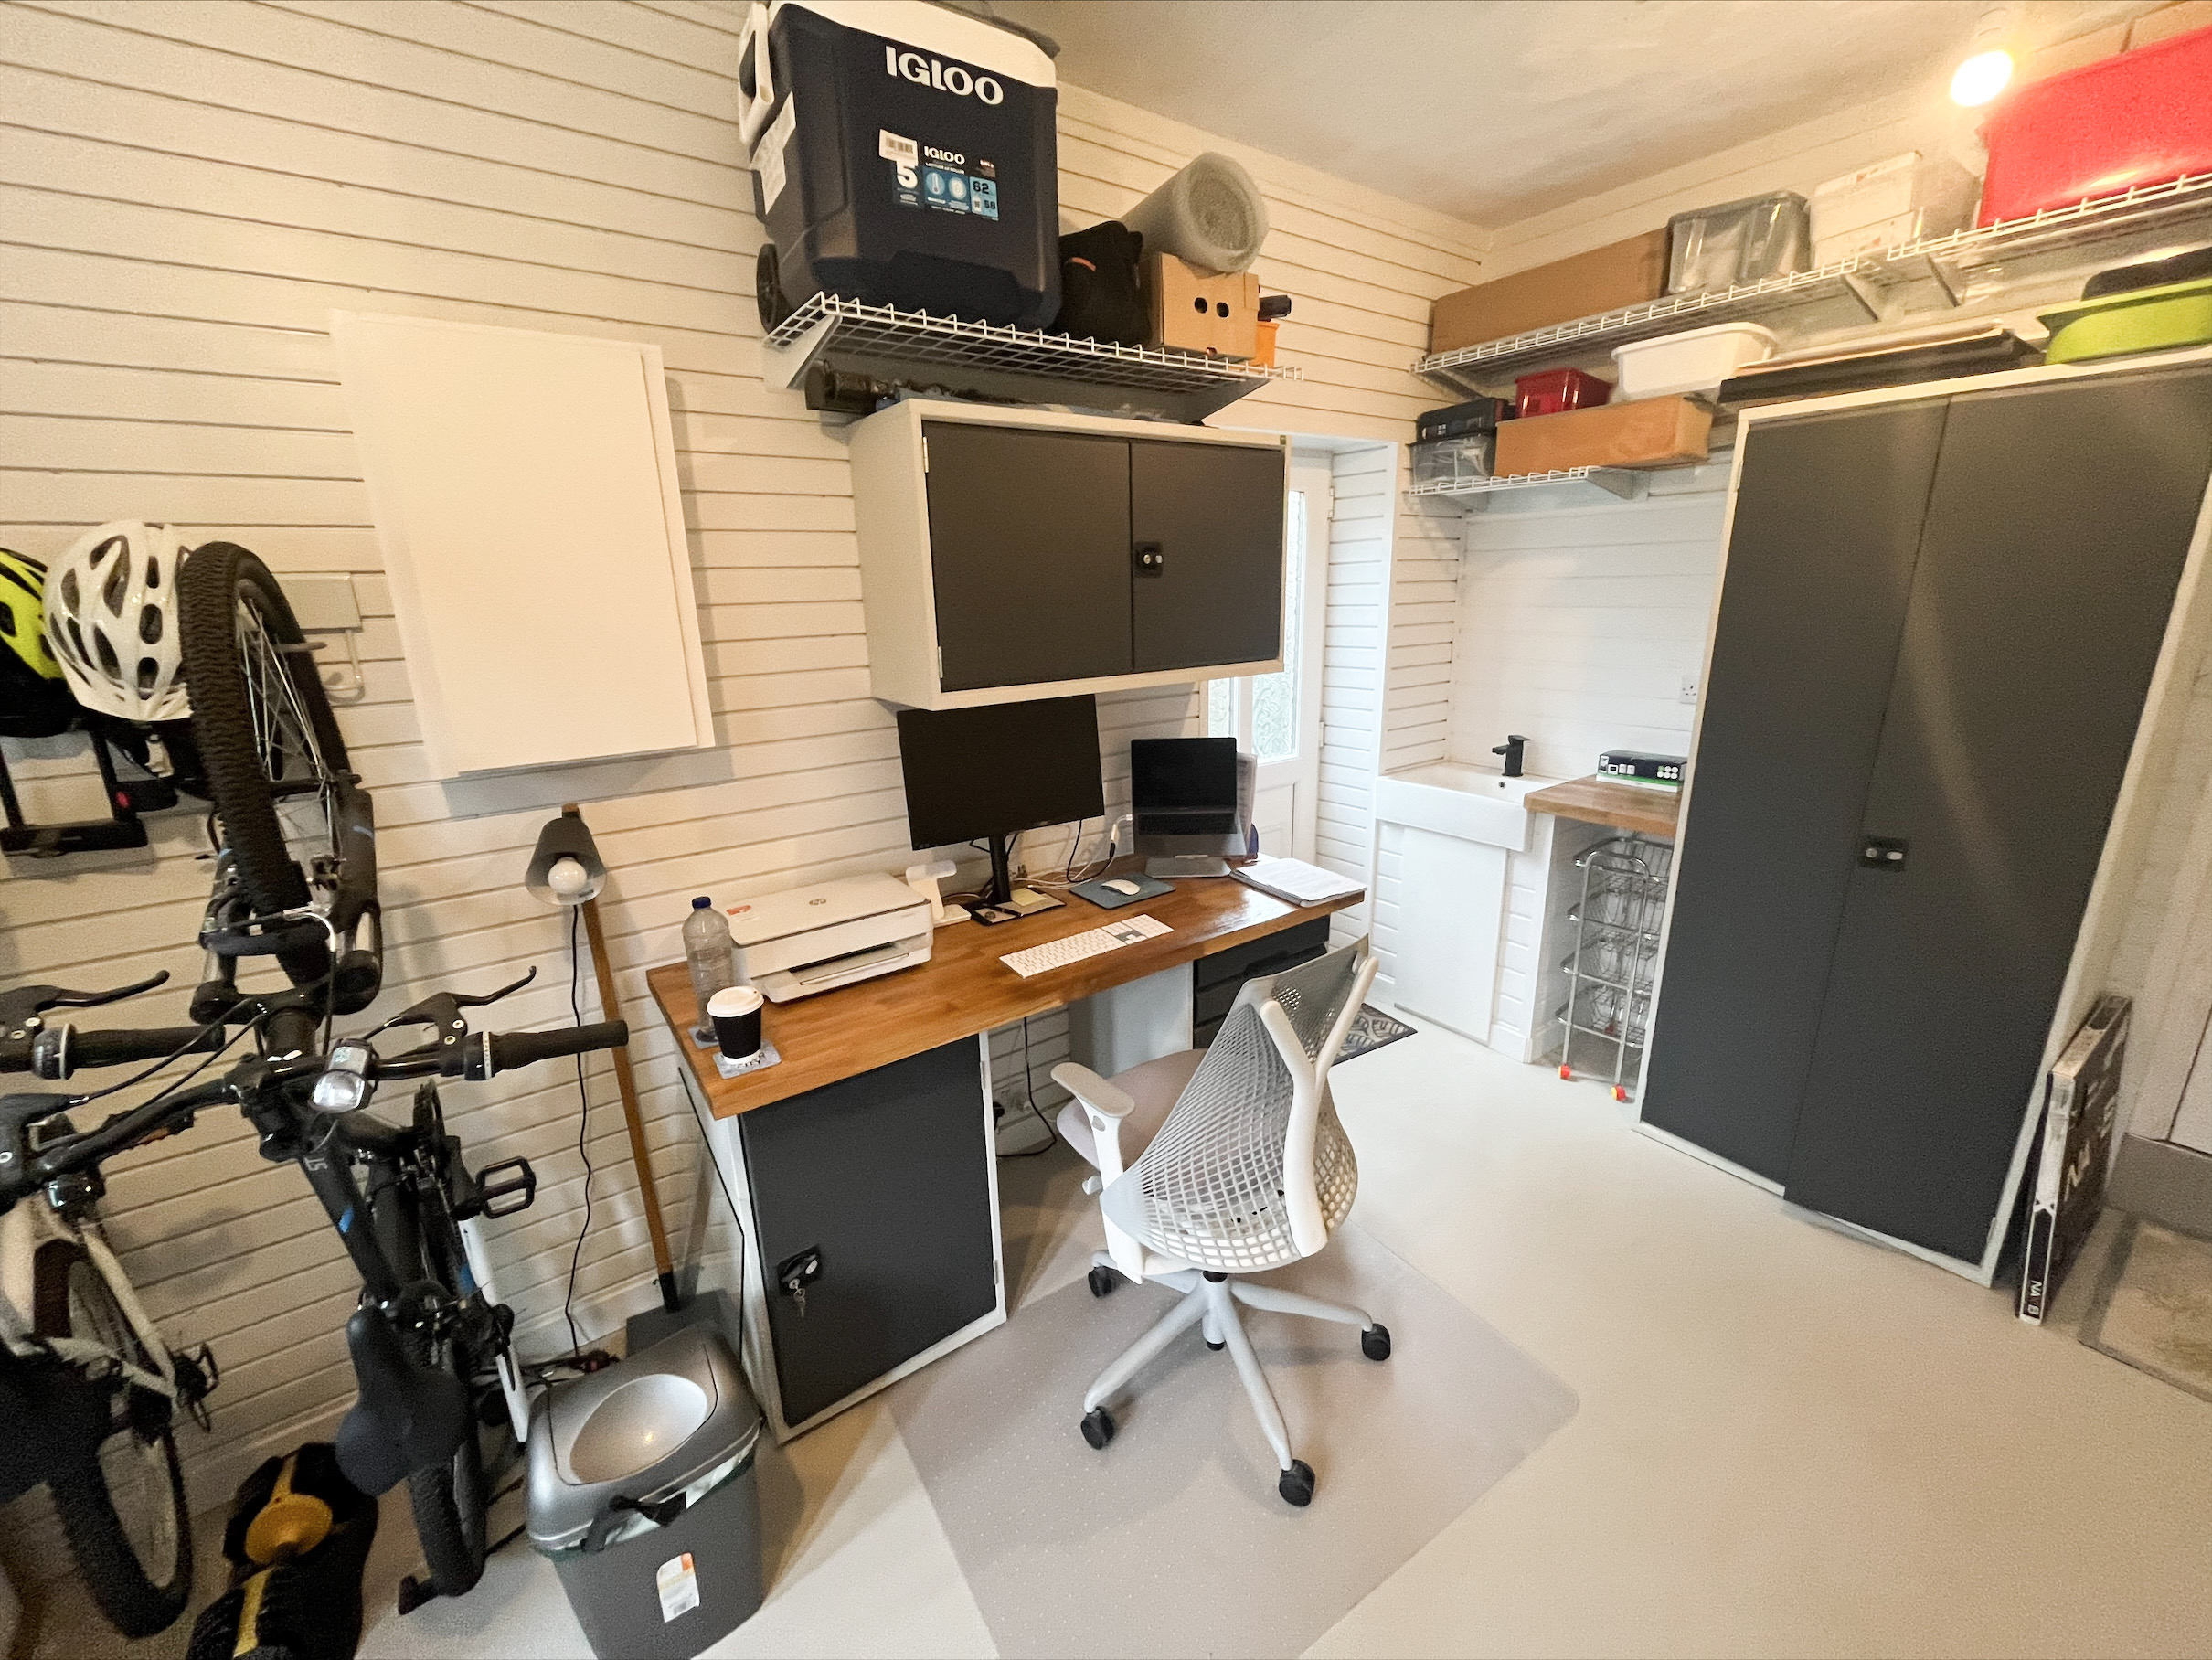 Converting the garage into a home office